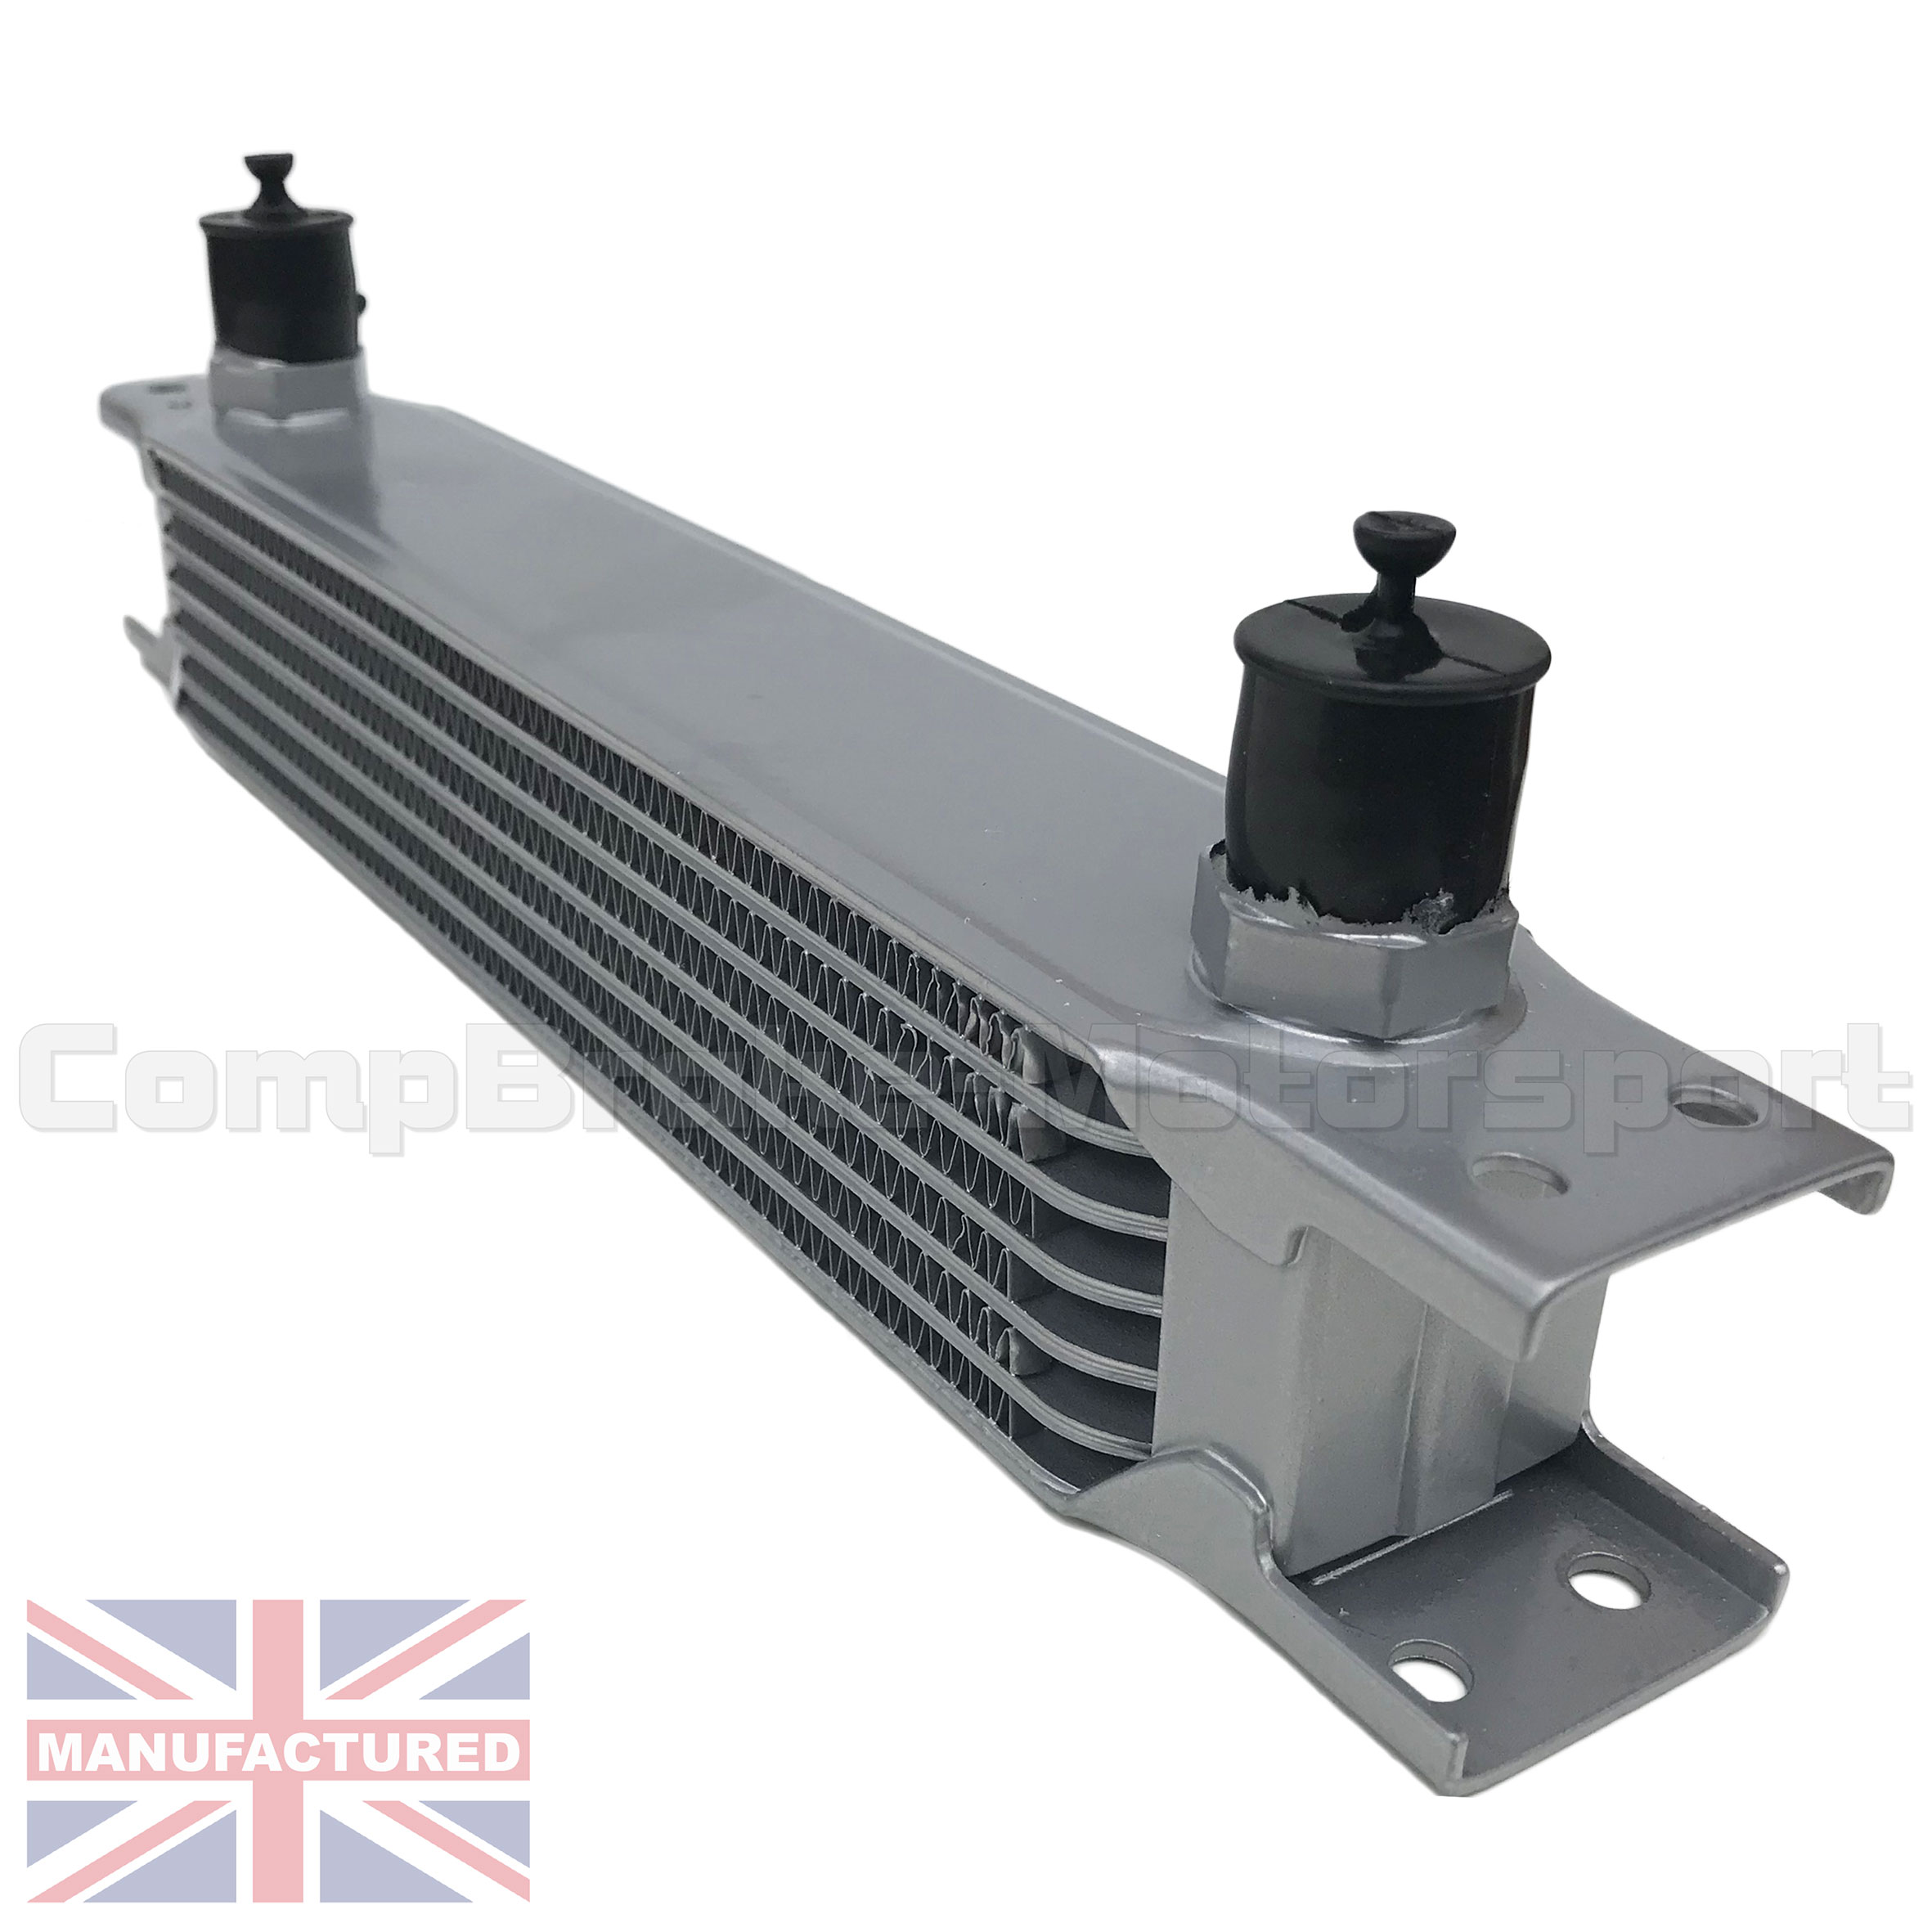 Universal 7 Row AN10 Engine Transmission 248mm Oil Cooler w/ Fittings Kit Silver